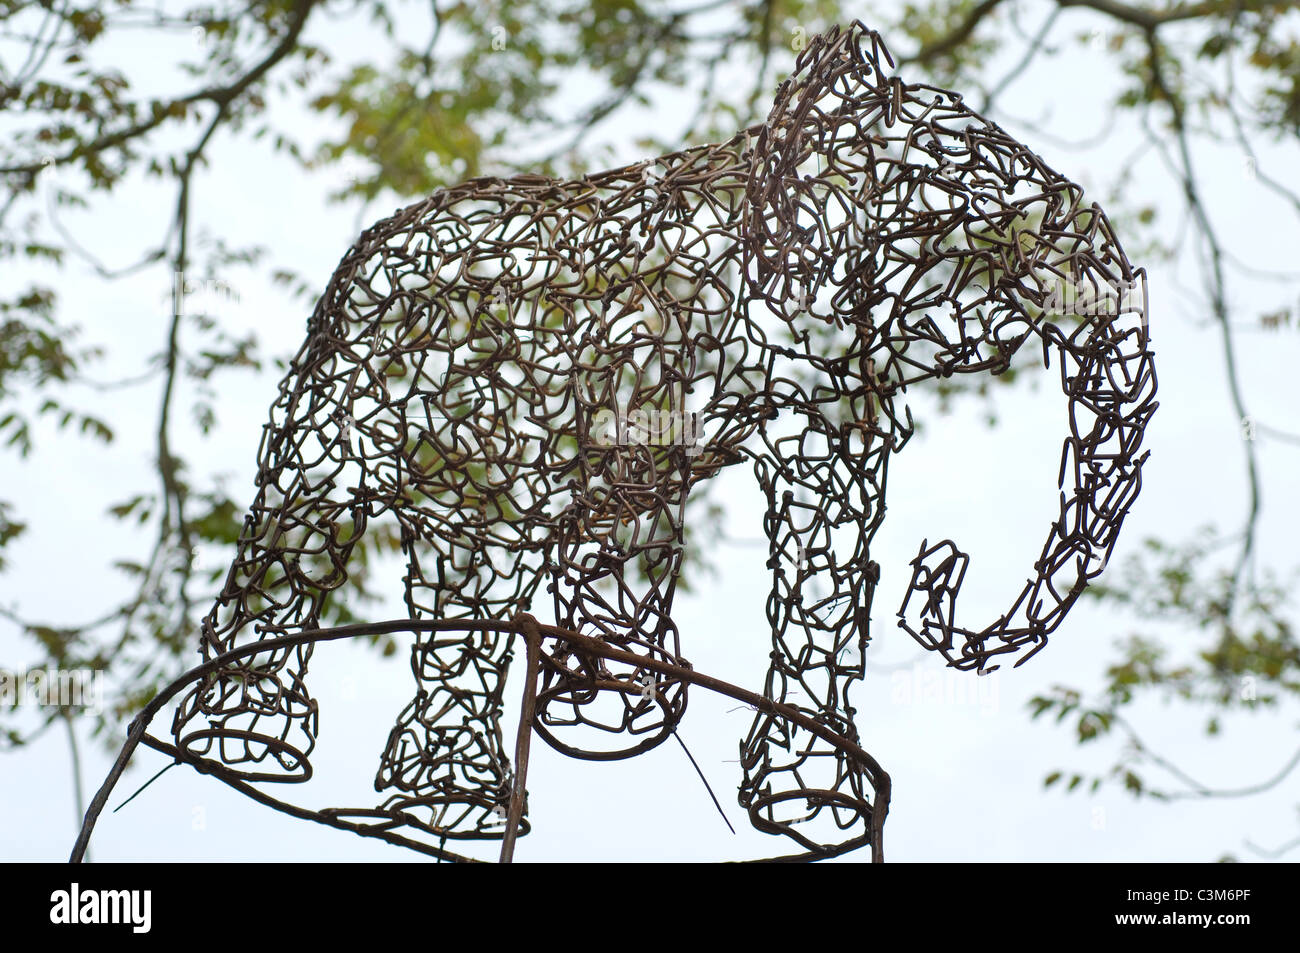 Sculptor Anthony Heywood's elephant made from recycled bent nails. Stock Photo